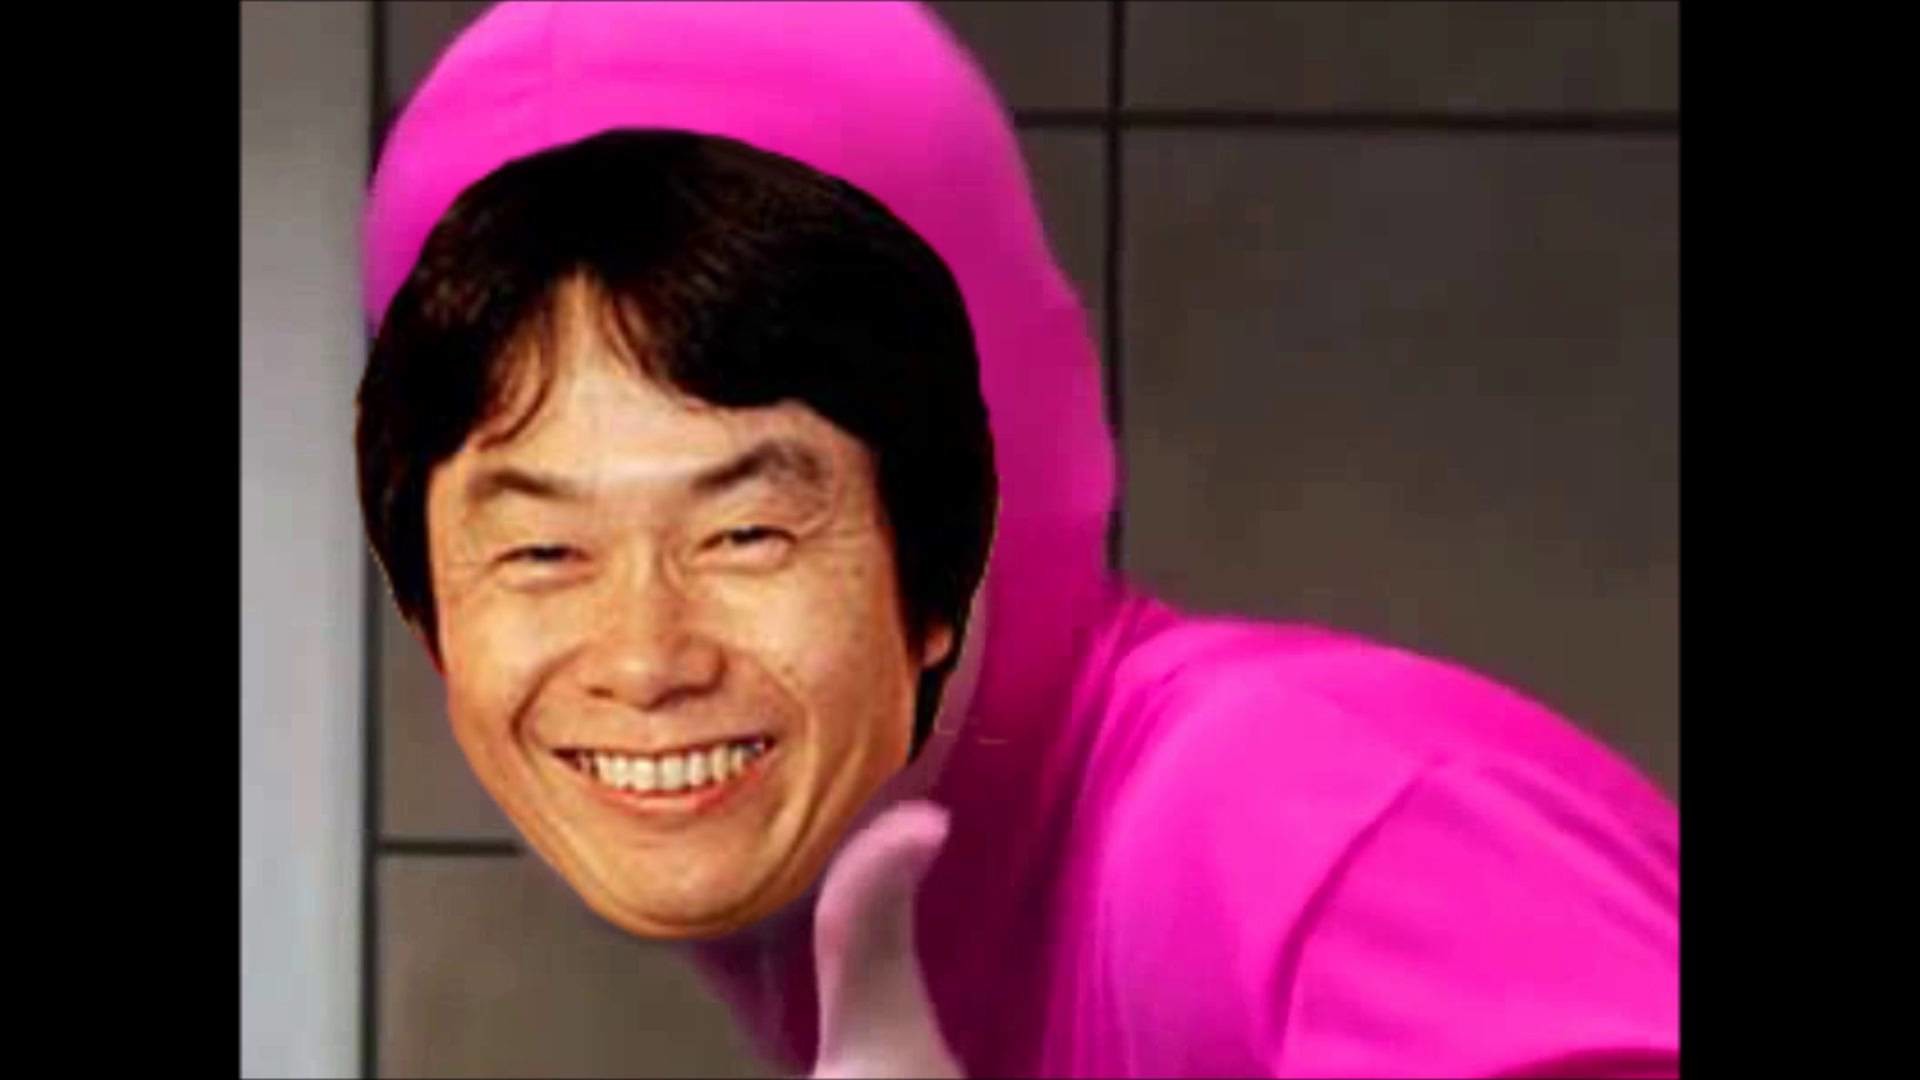 Filthy Frank on the Wii Shop Channel (Kazumi Totaka vs. Pink Guy)